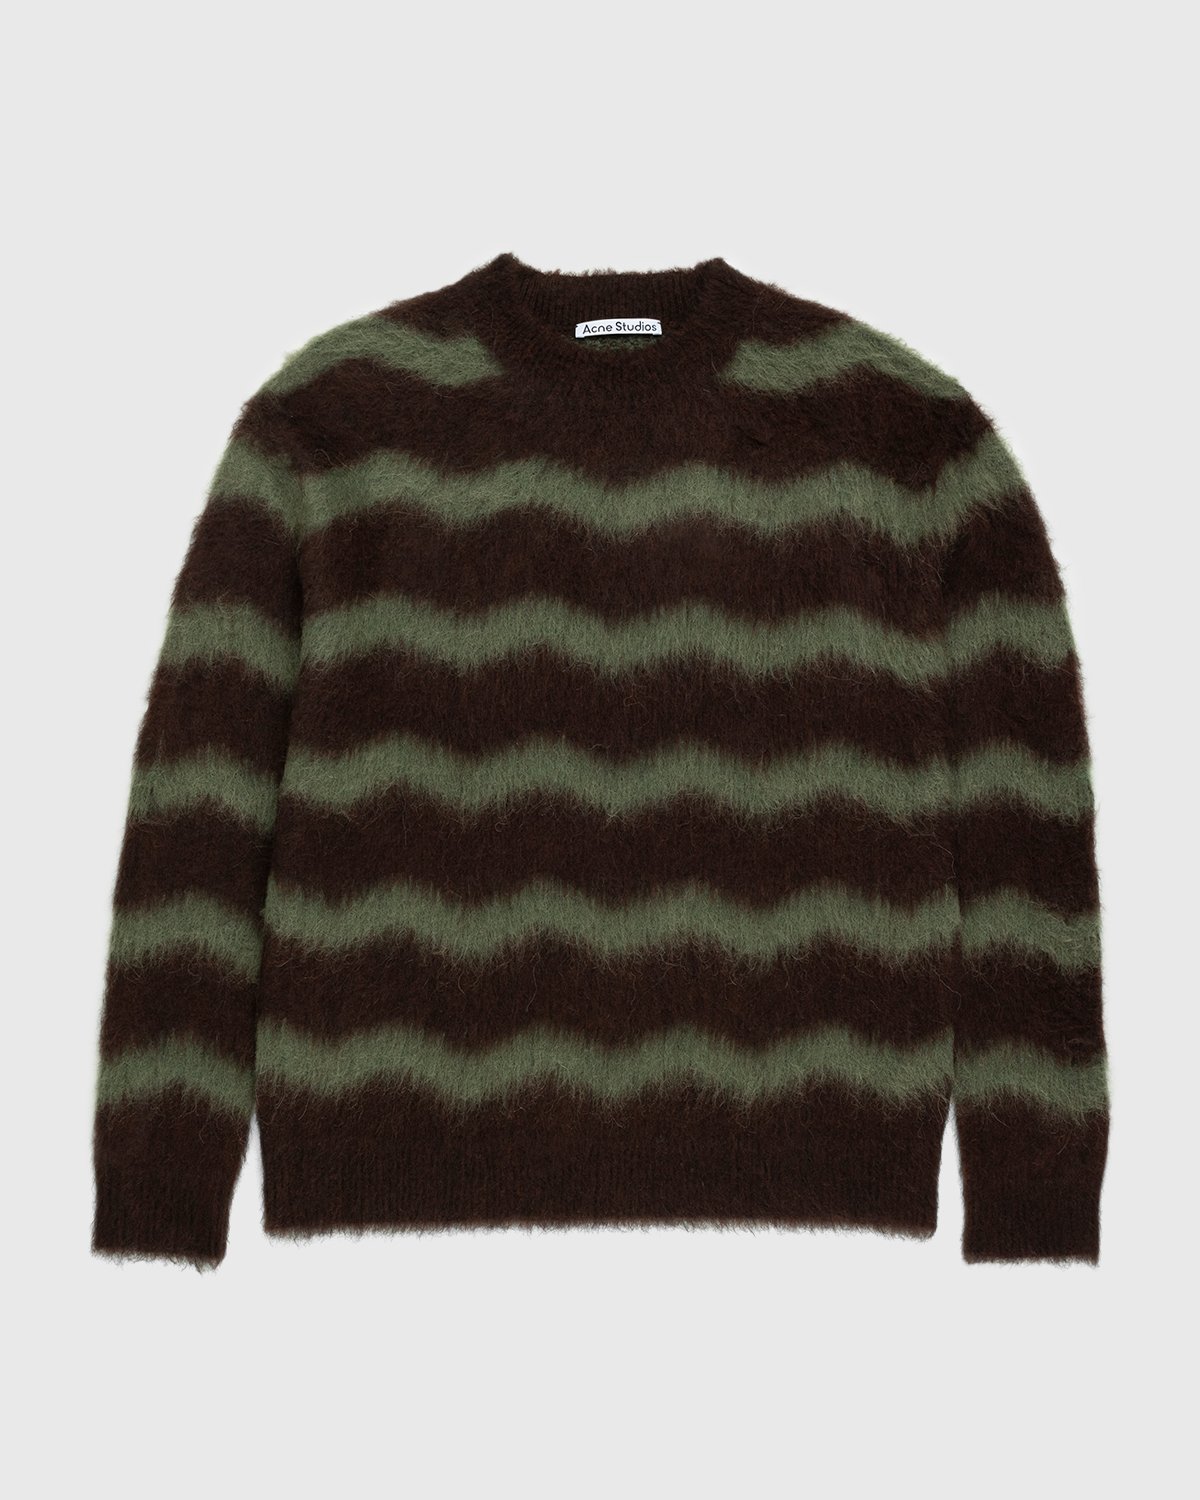 Acne Studios - Striped Fuzzy Sweater Brown/Military Green - Clothing - Brown - Image 1